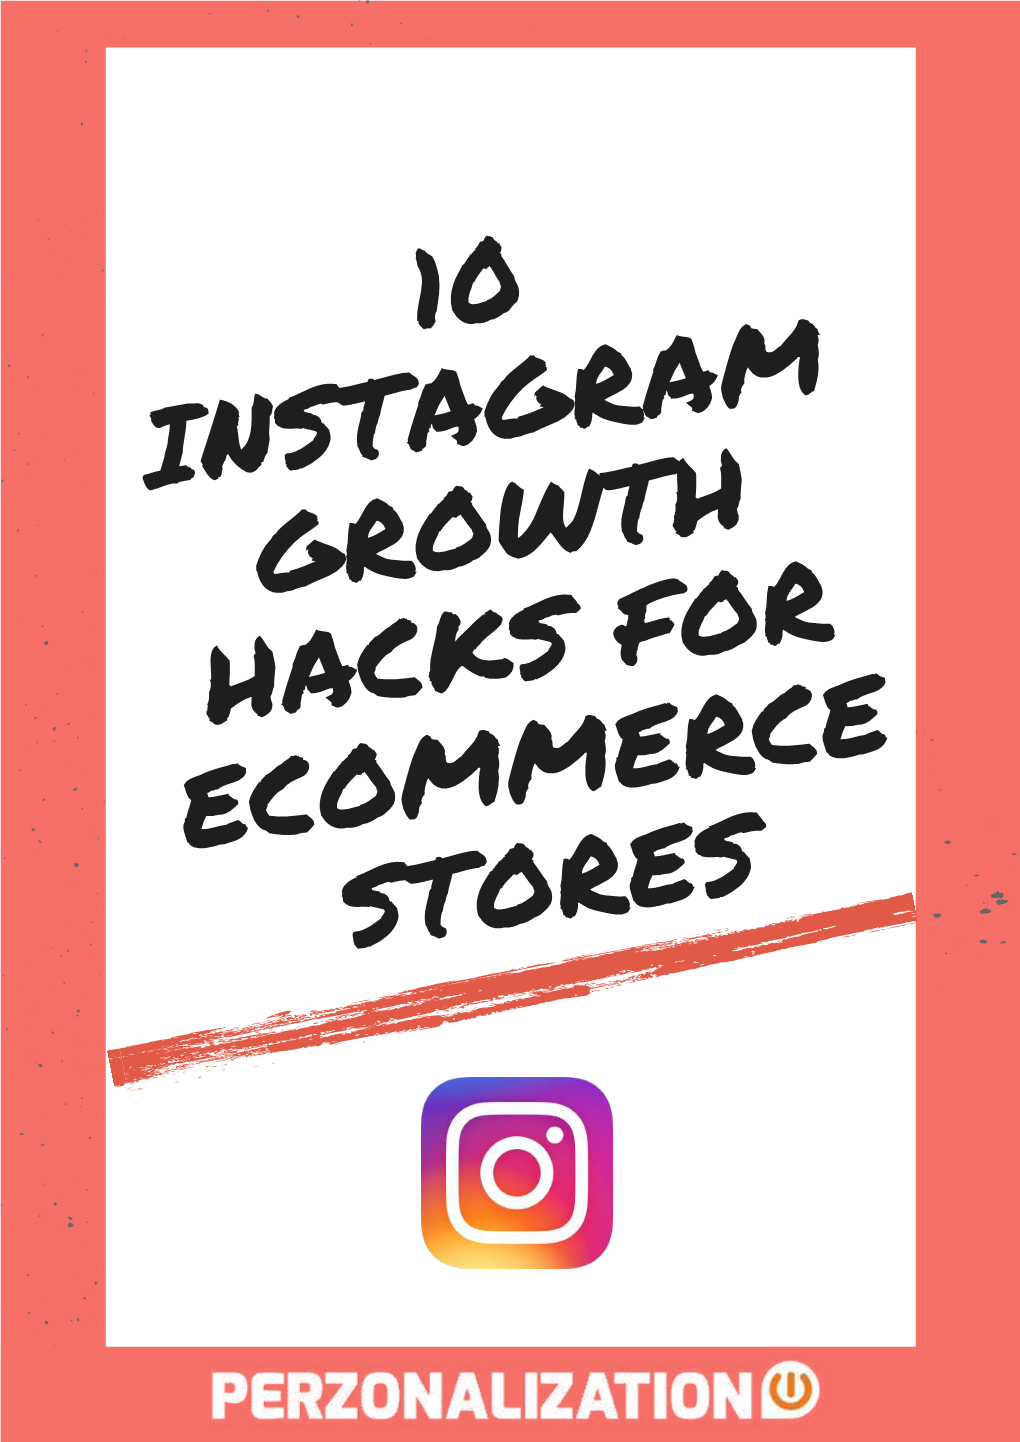 10 Instagram Growth Hacks for Ecommerce Stores